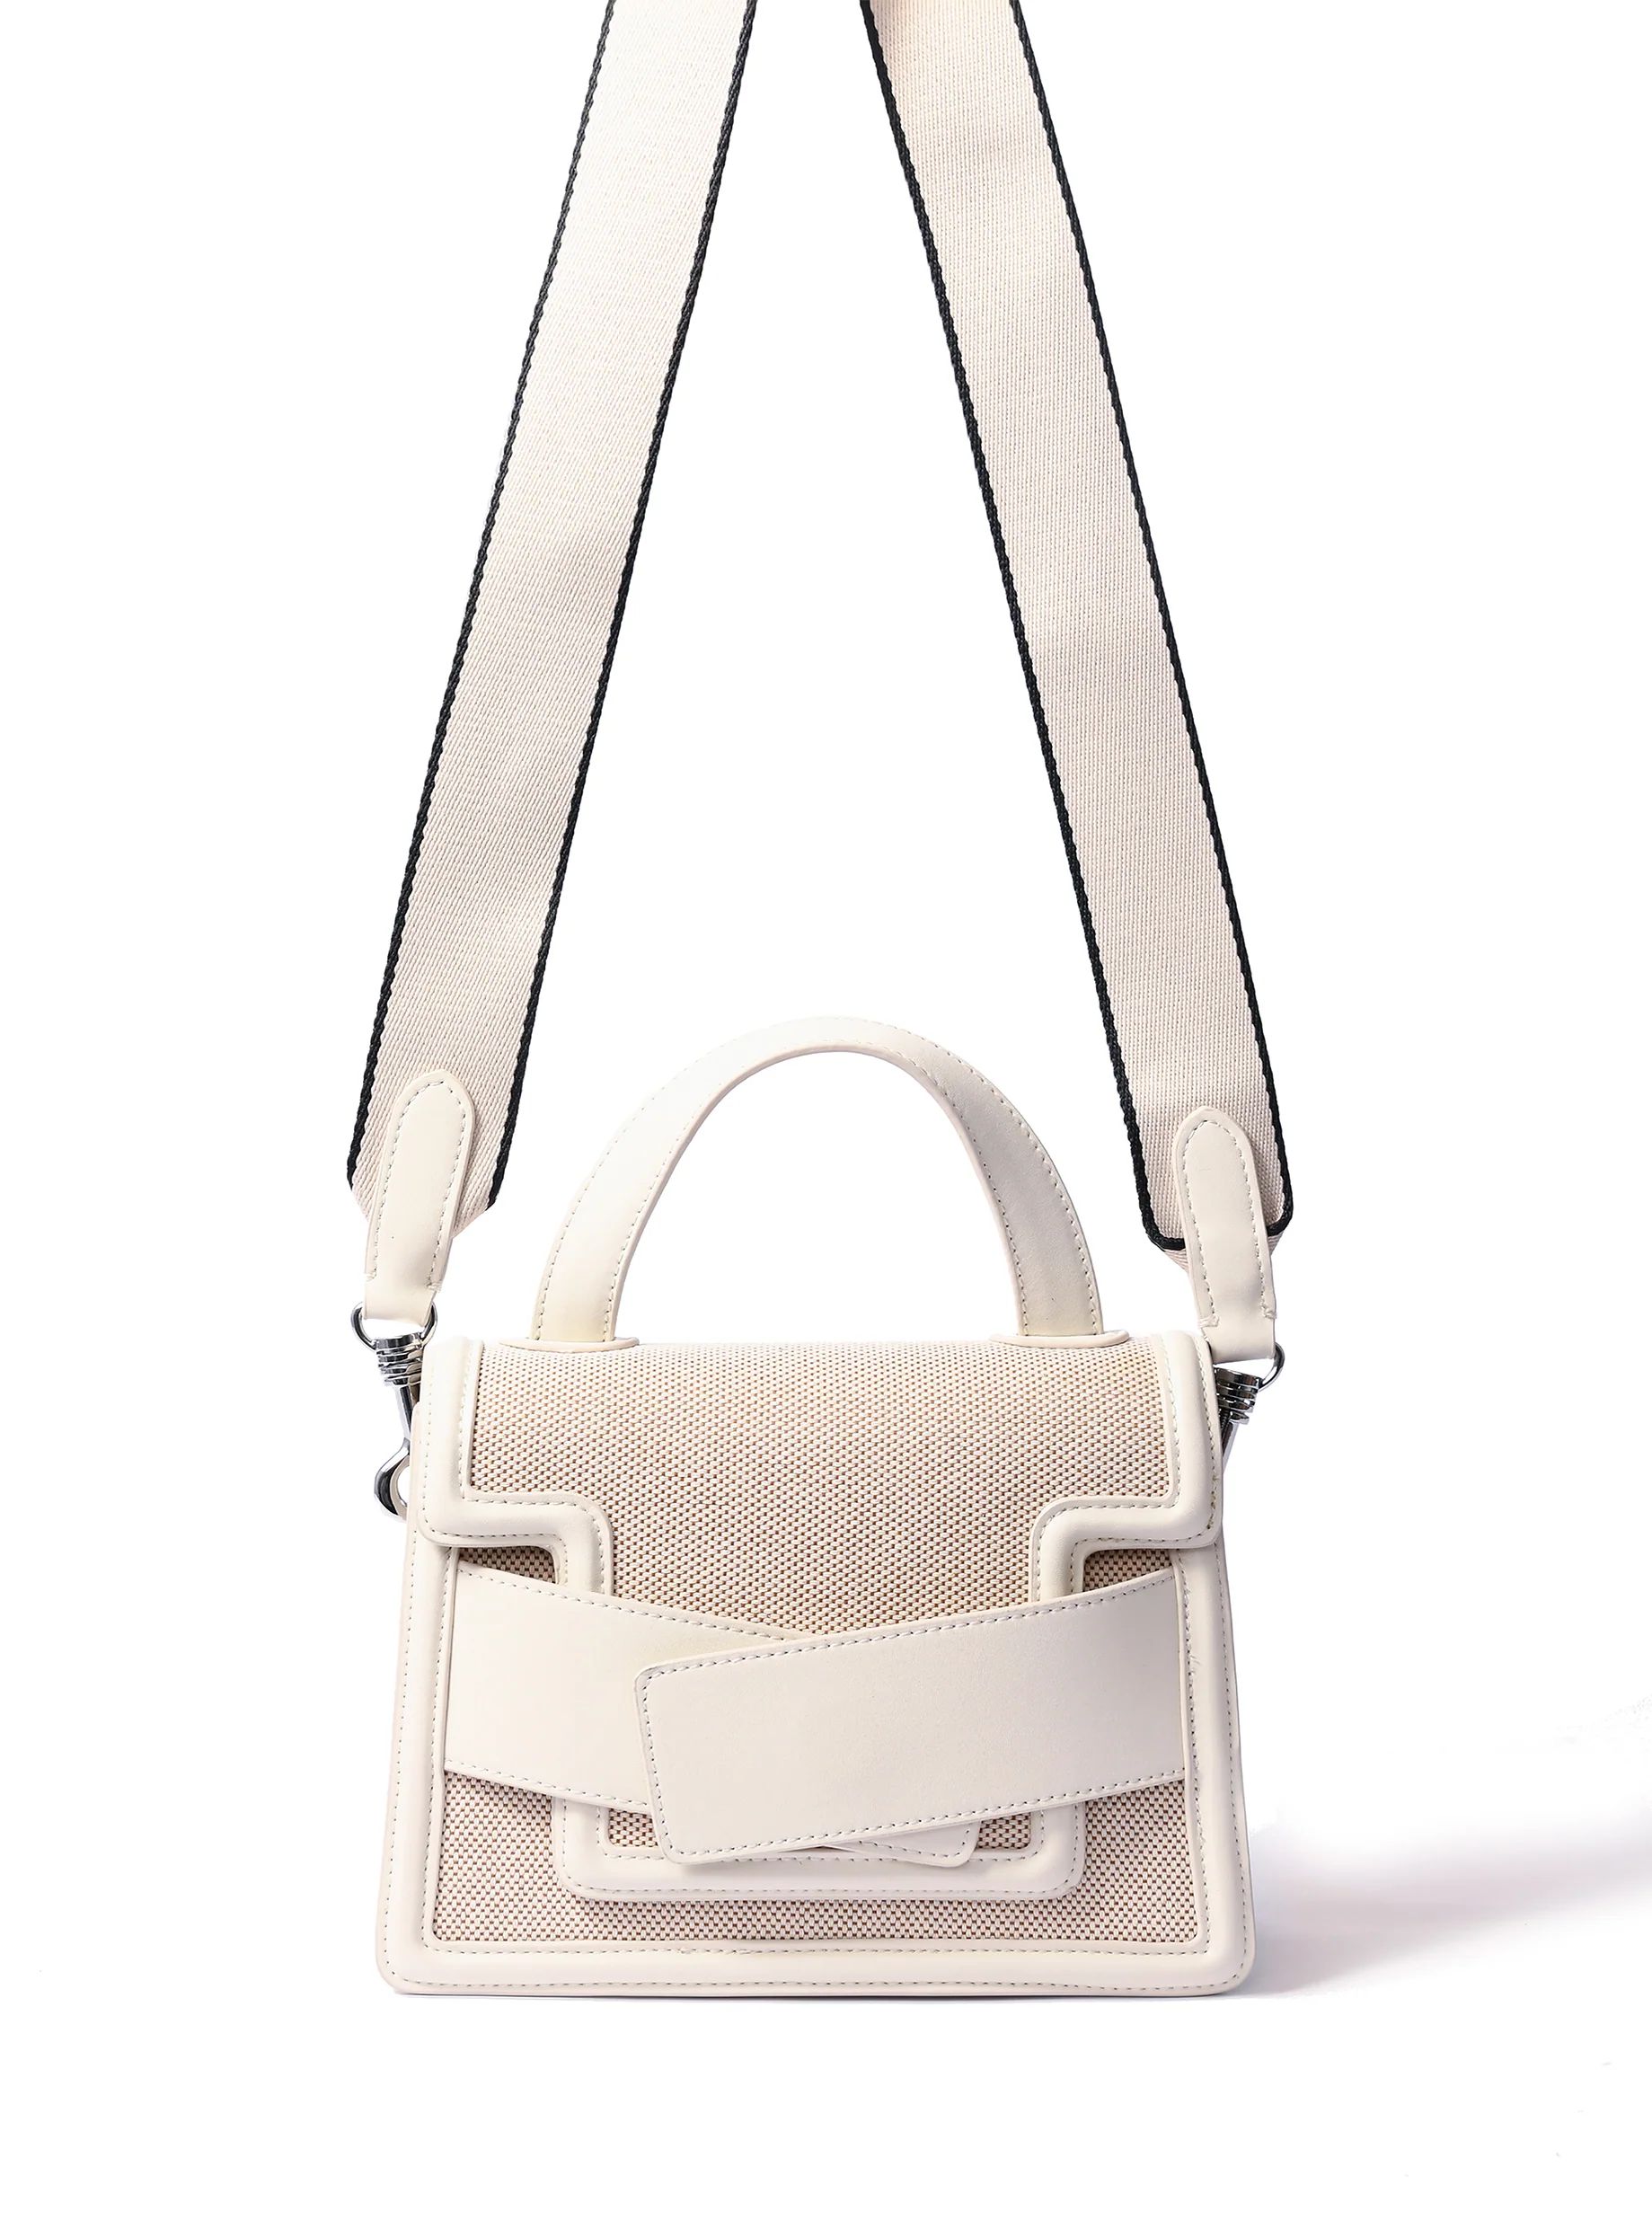 Evelyn Bag in Canvas and Genuine Leather, White | Bob Ore Blue Collection